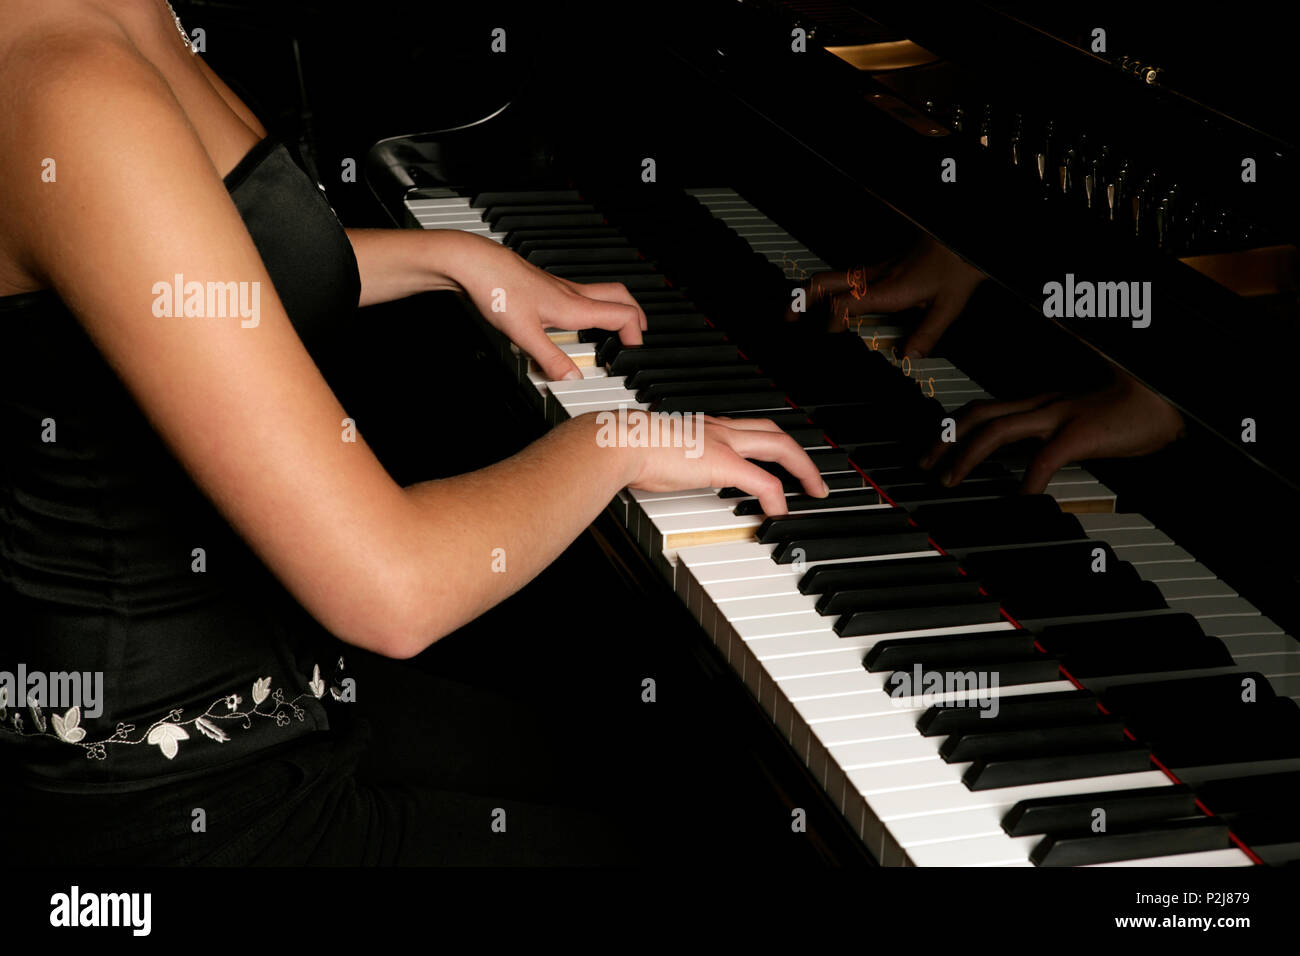 young woman playing the piano back view. Stock Photo